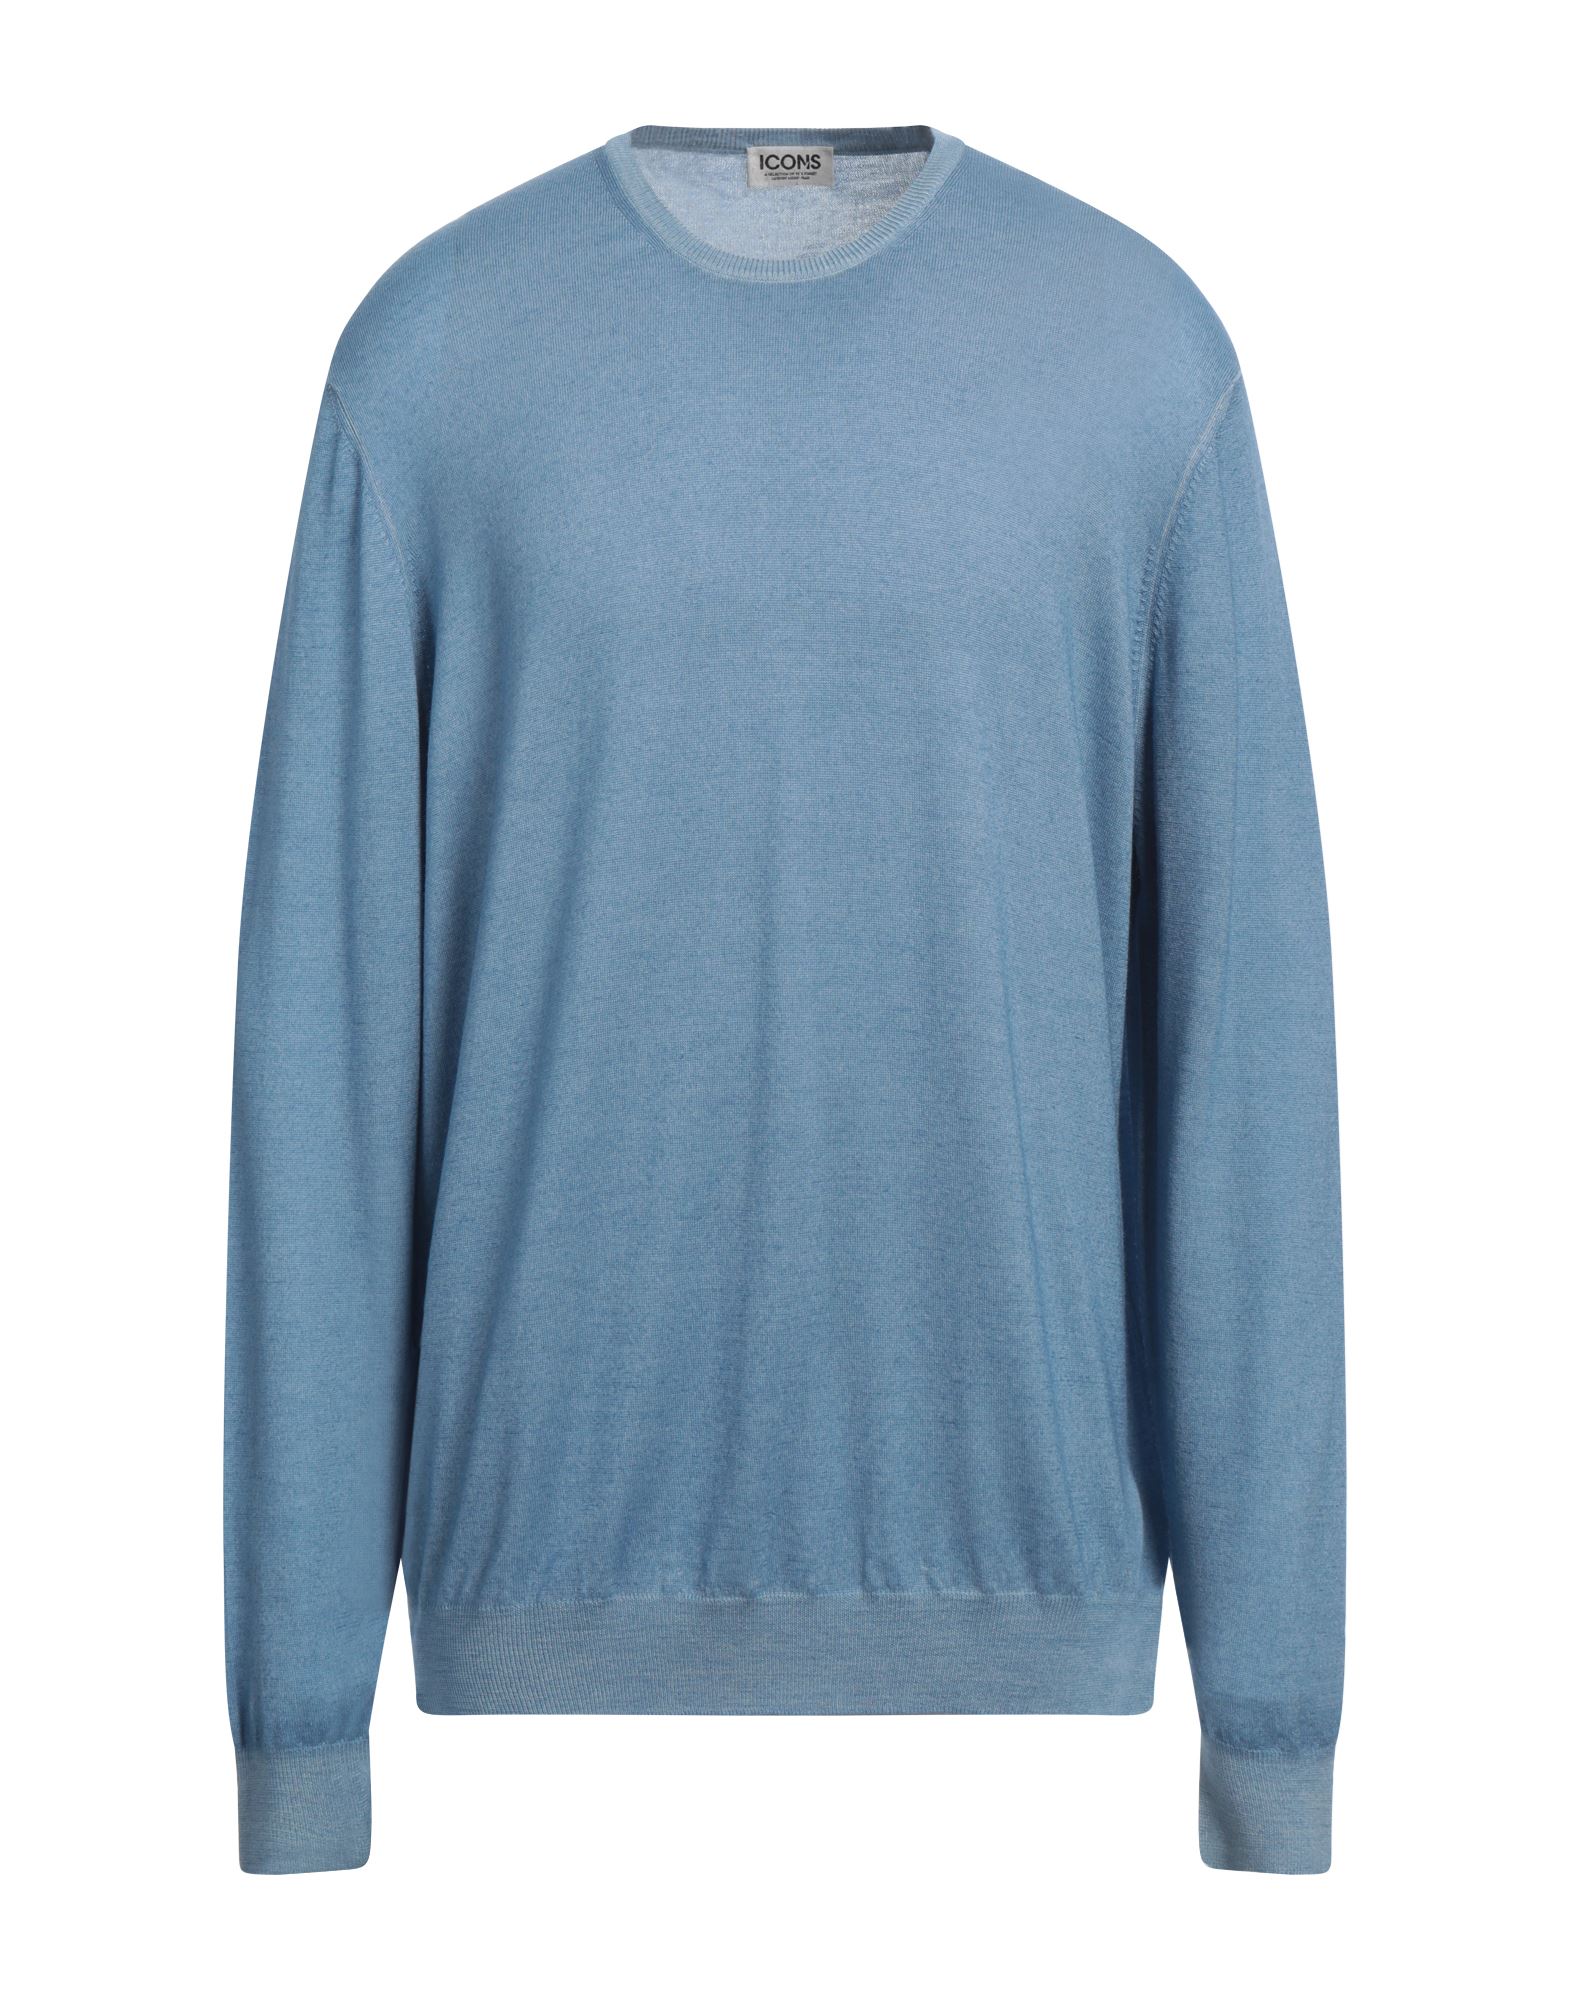 ICONS COLLECTIONS Pullover Herren Azurblau von ICONS COLLECTIONS